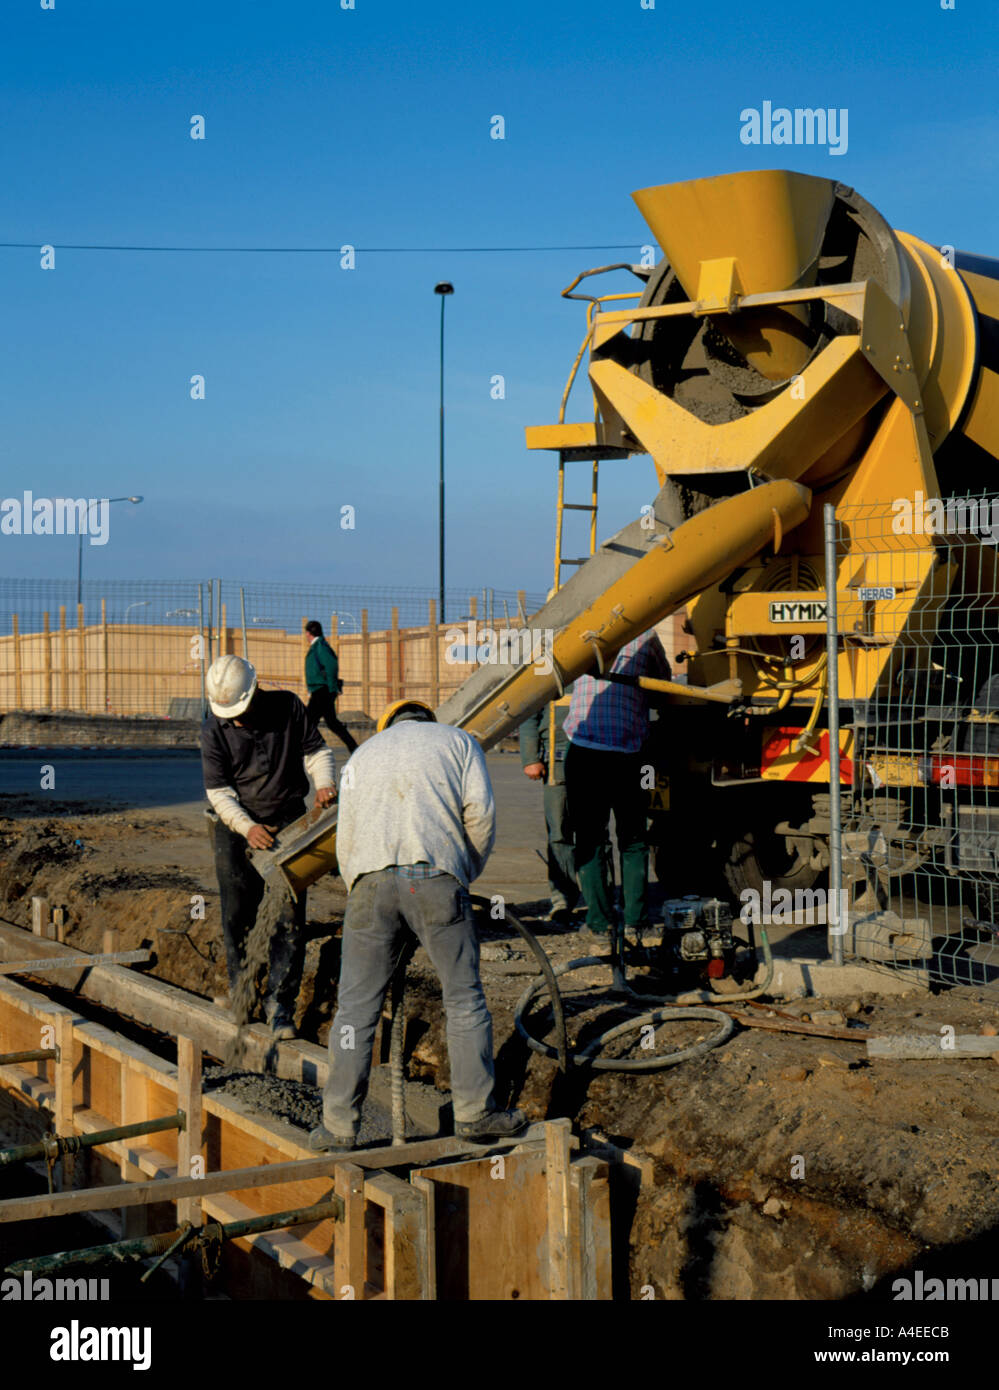 Pouring concrete from a ready mix concrete wagon to form a building foundation. Stock Photo